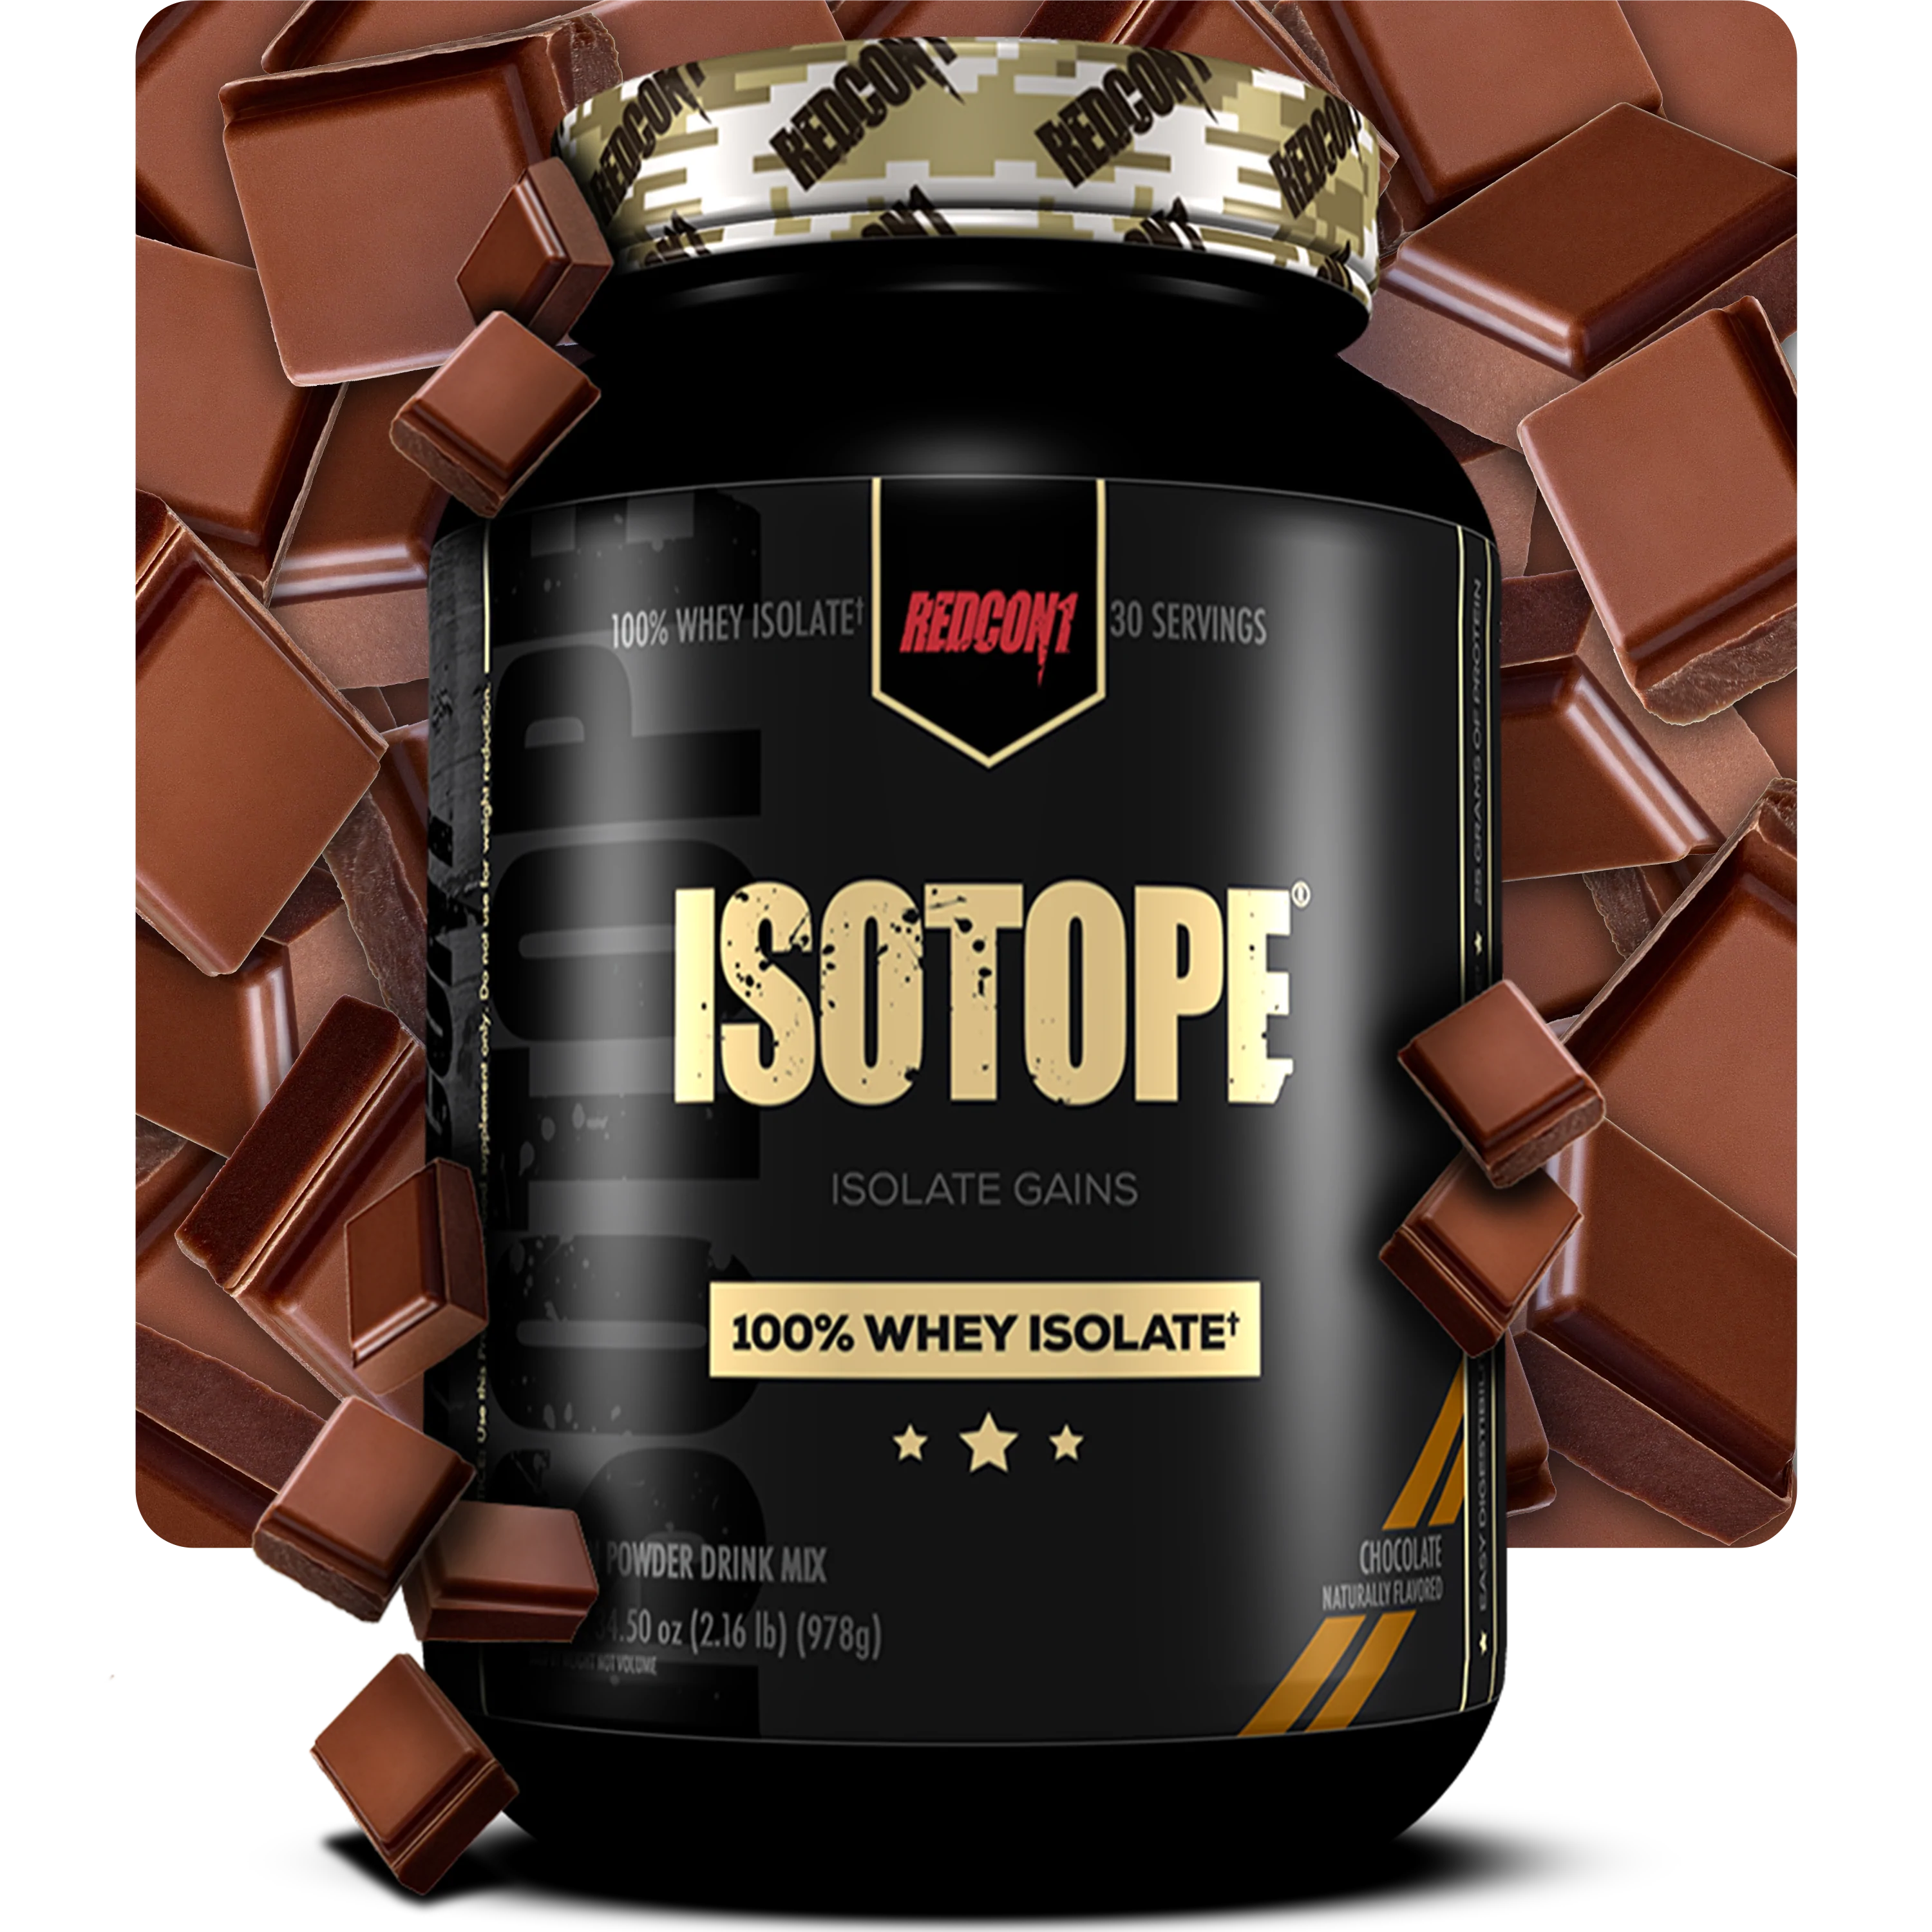 Redcon1 ISOTOPE 100% Whey Isolate 1026g